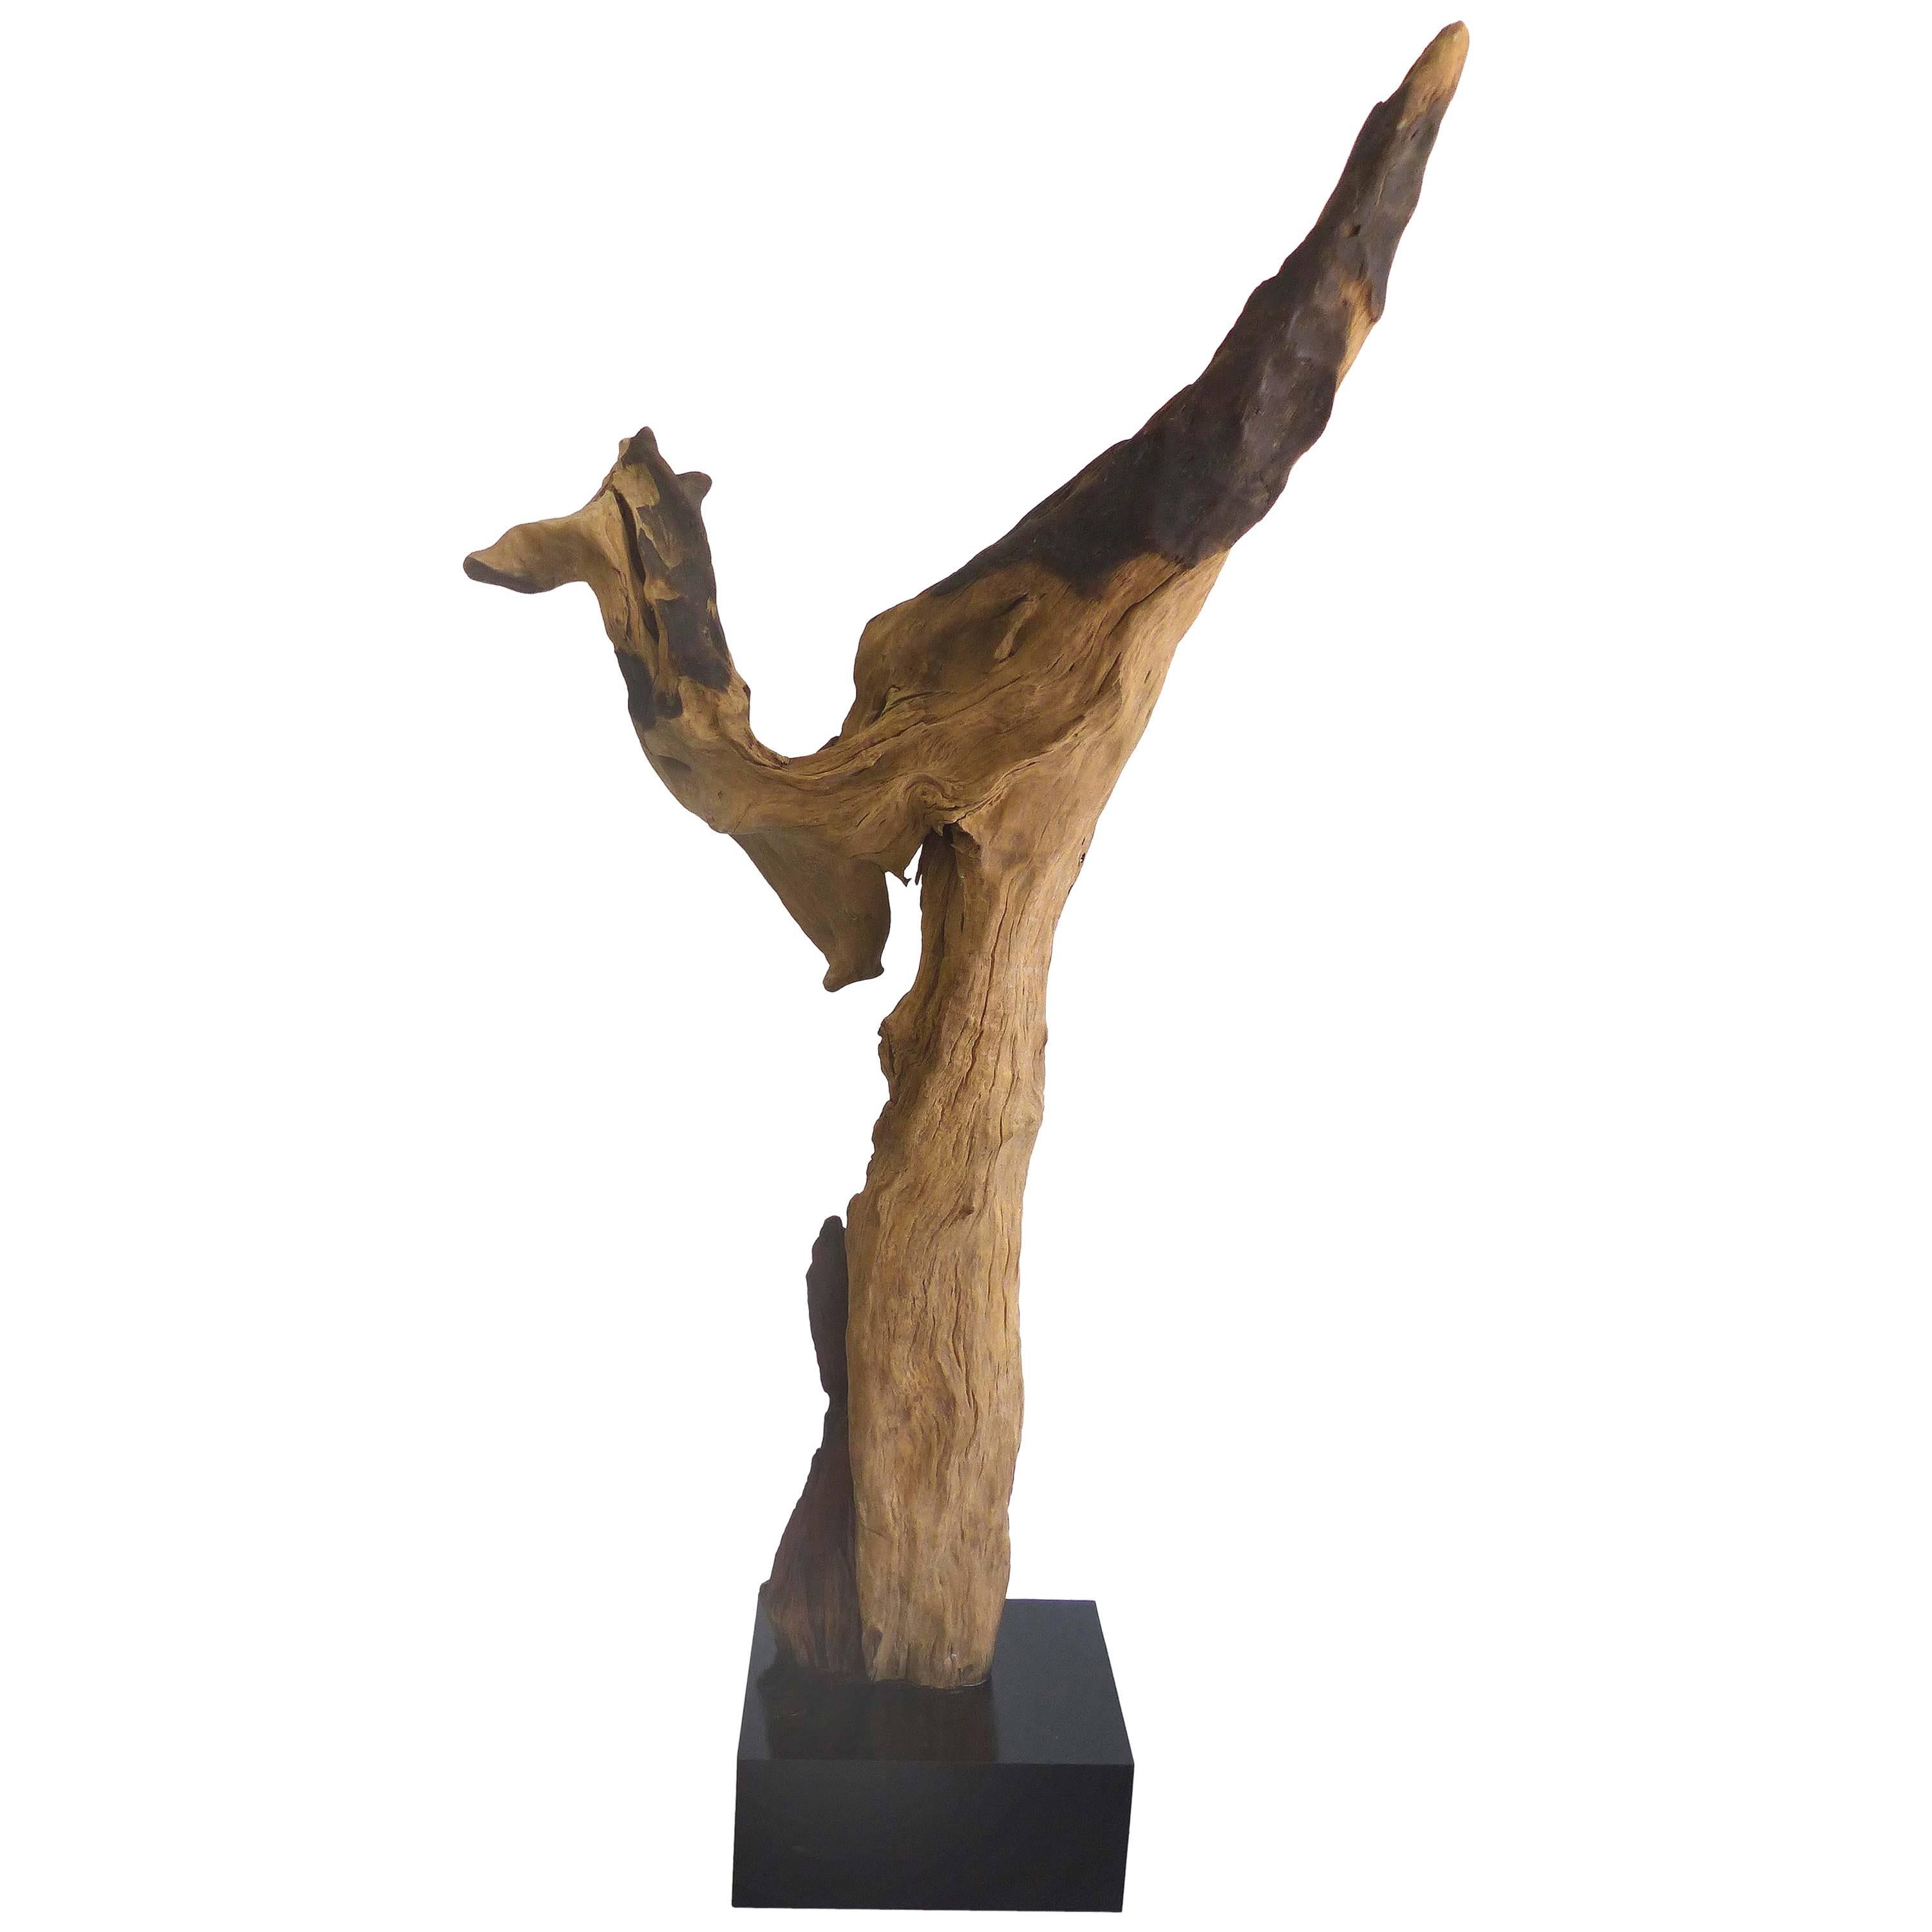 "Kangaroo" a Petrified Wood Sculpture from the Amazon by Artist Valeria Totti